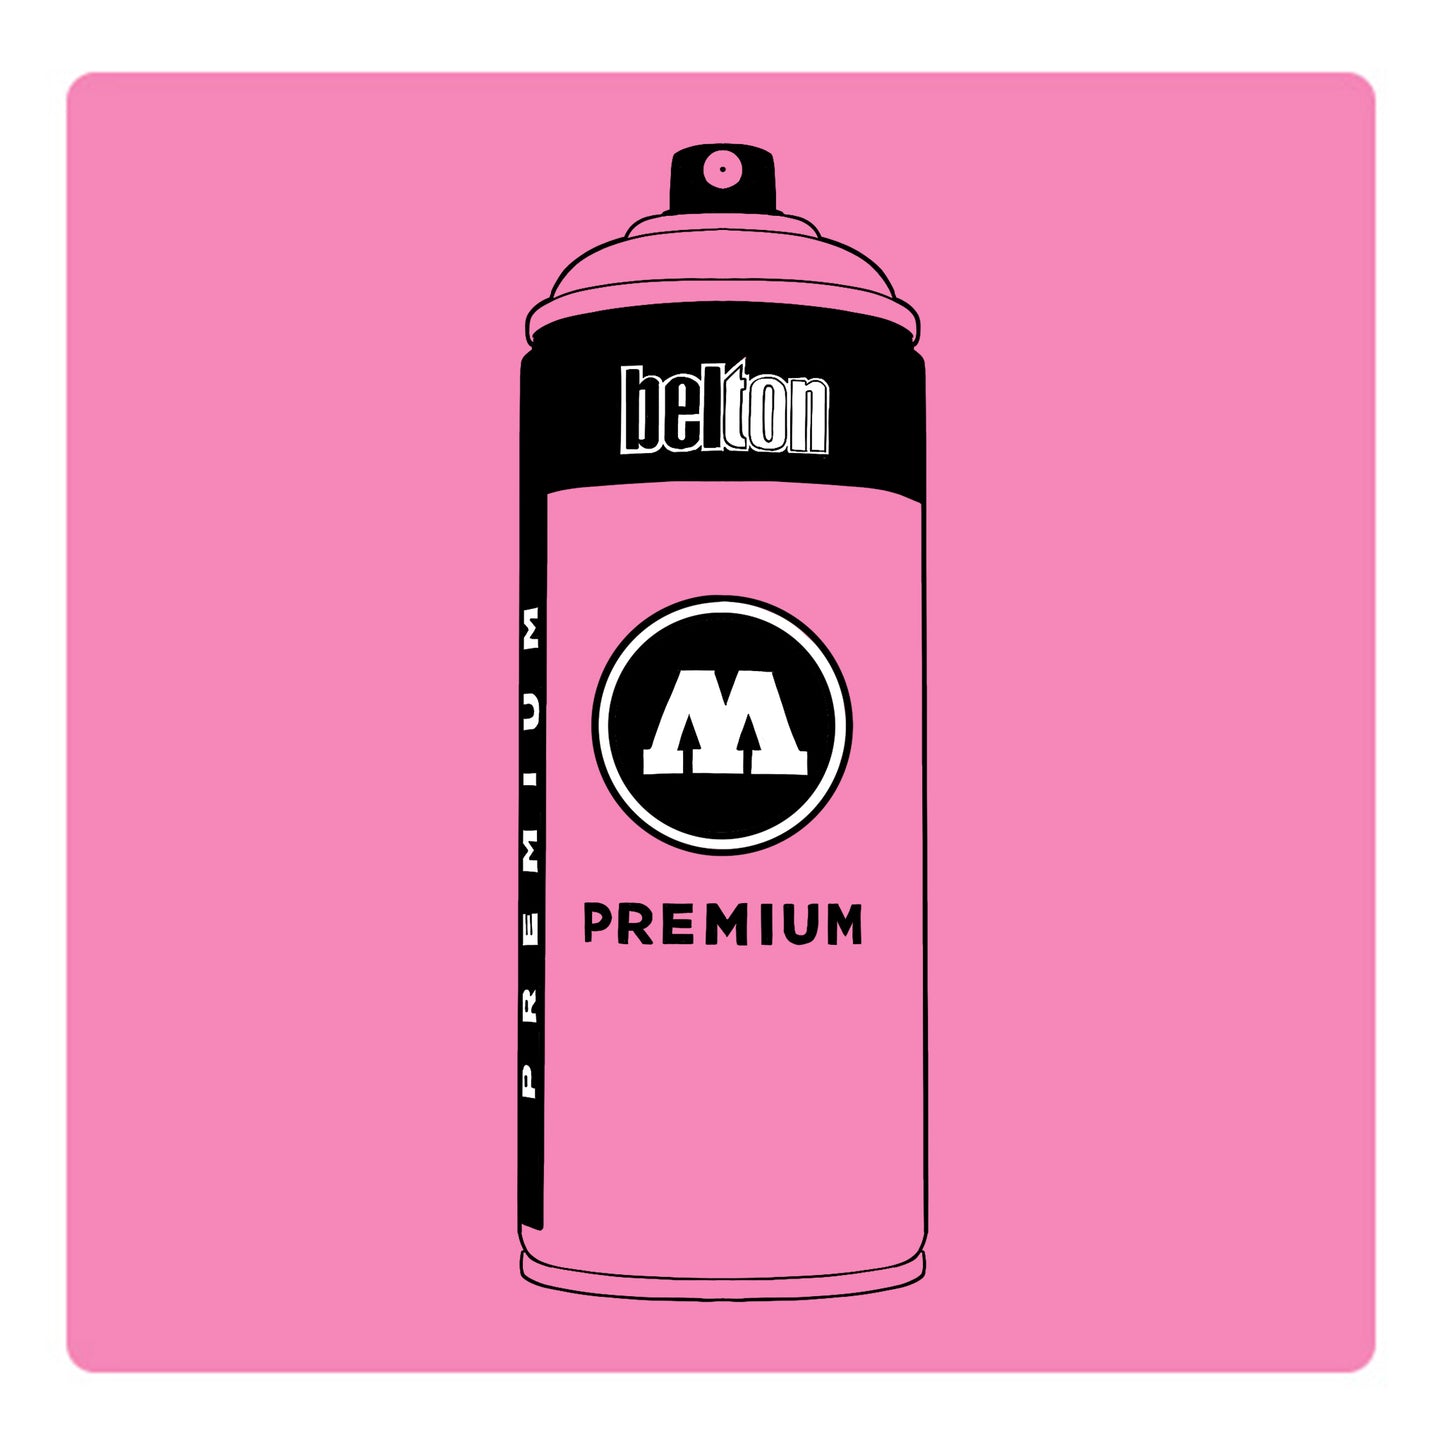 A black outline drawing of a pink spray paint can with the words "belton","premium" and the letter"M" written on the face in black and white font. The background is a color swatch of the same pink with a white border.